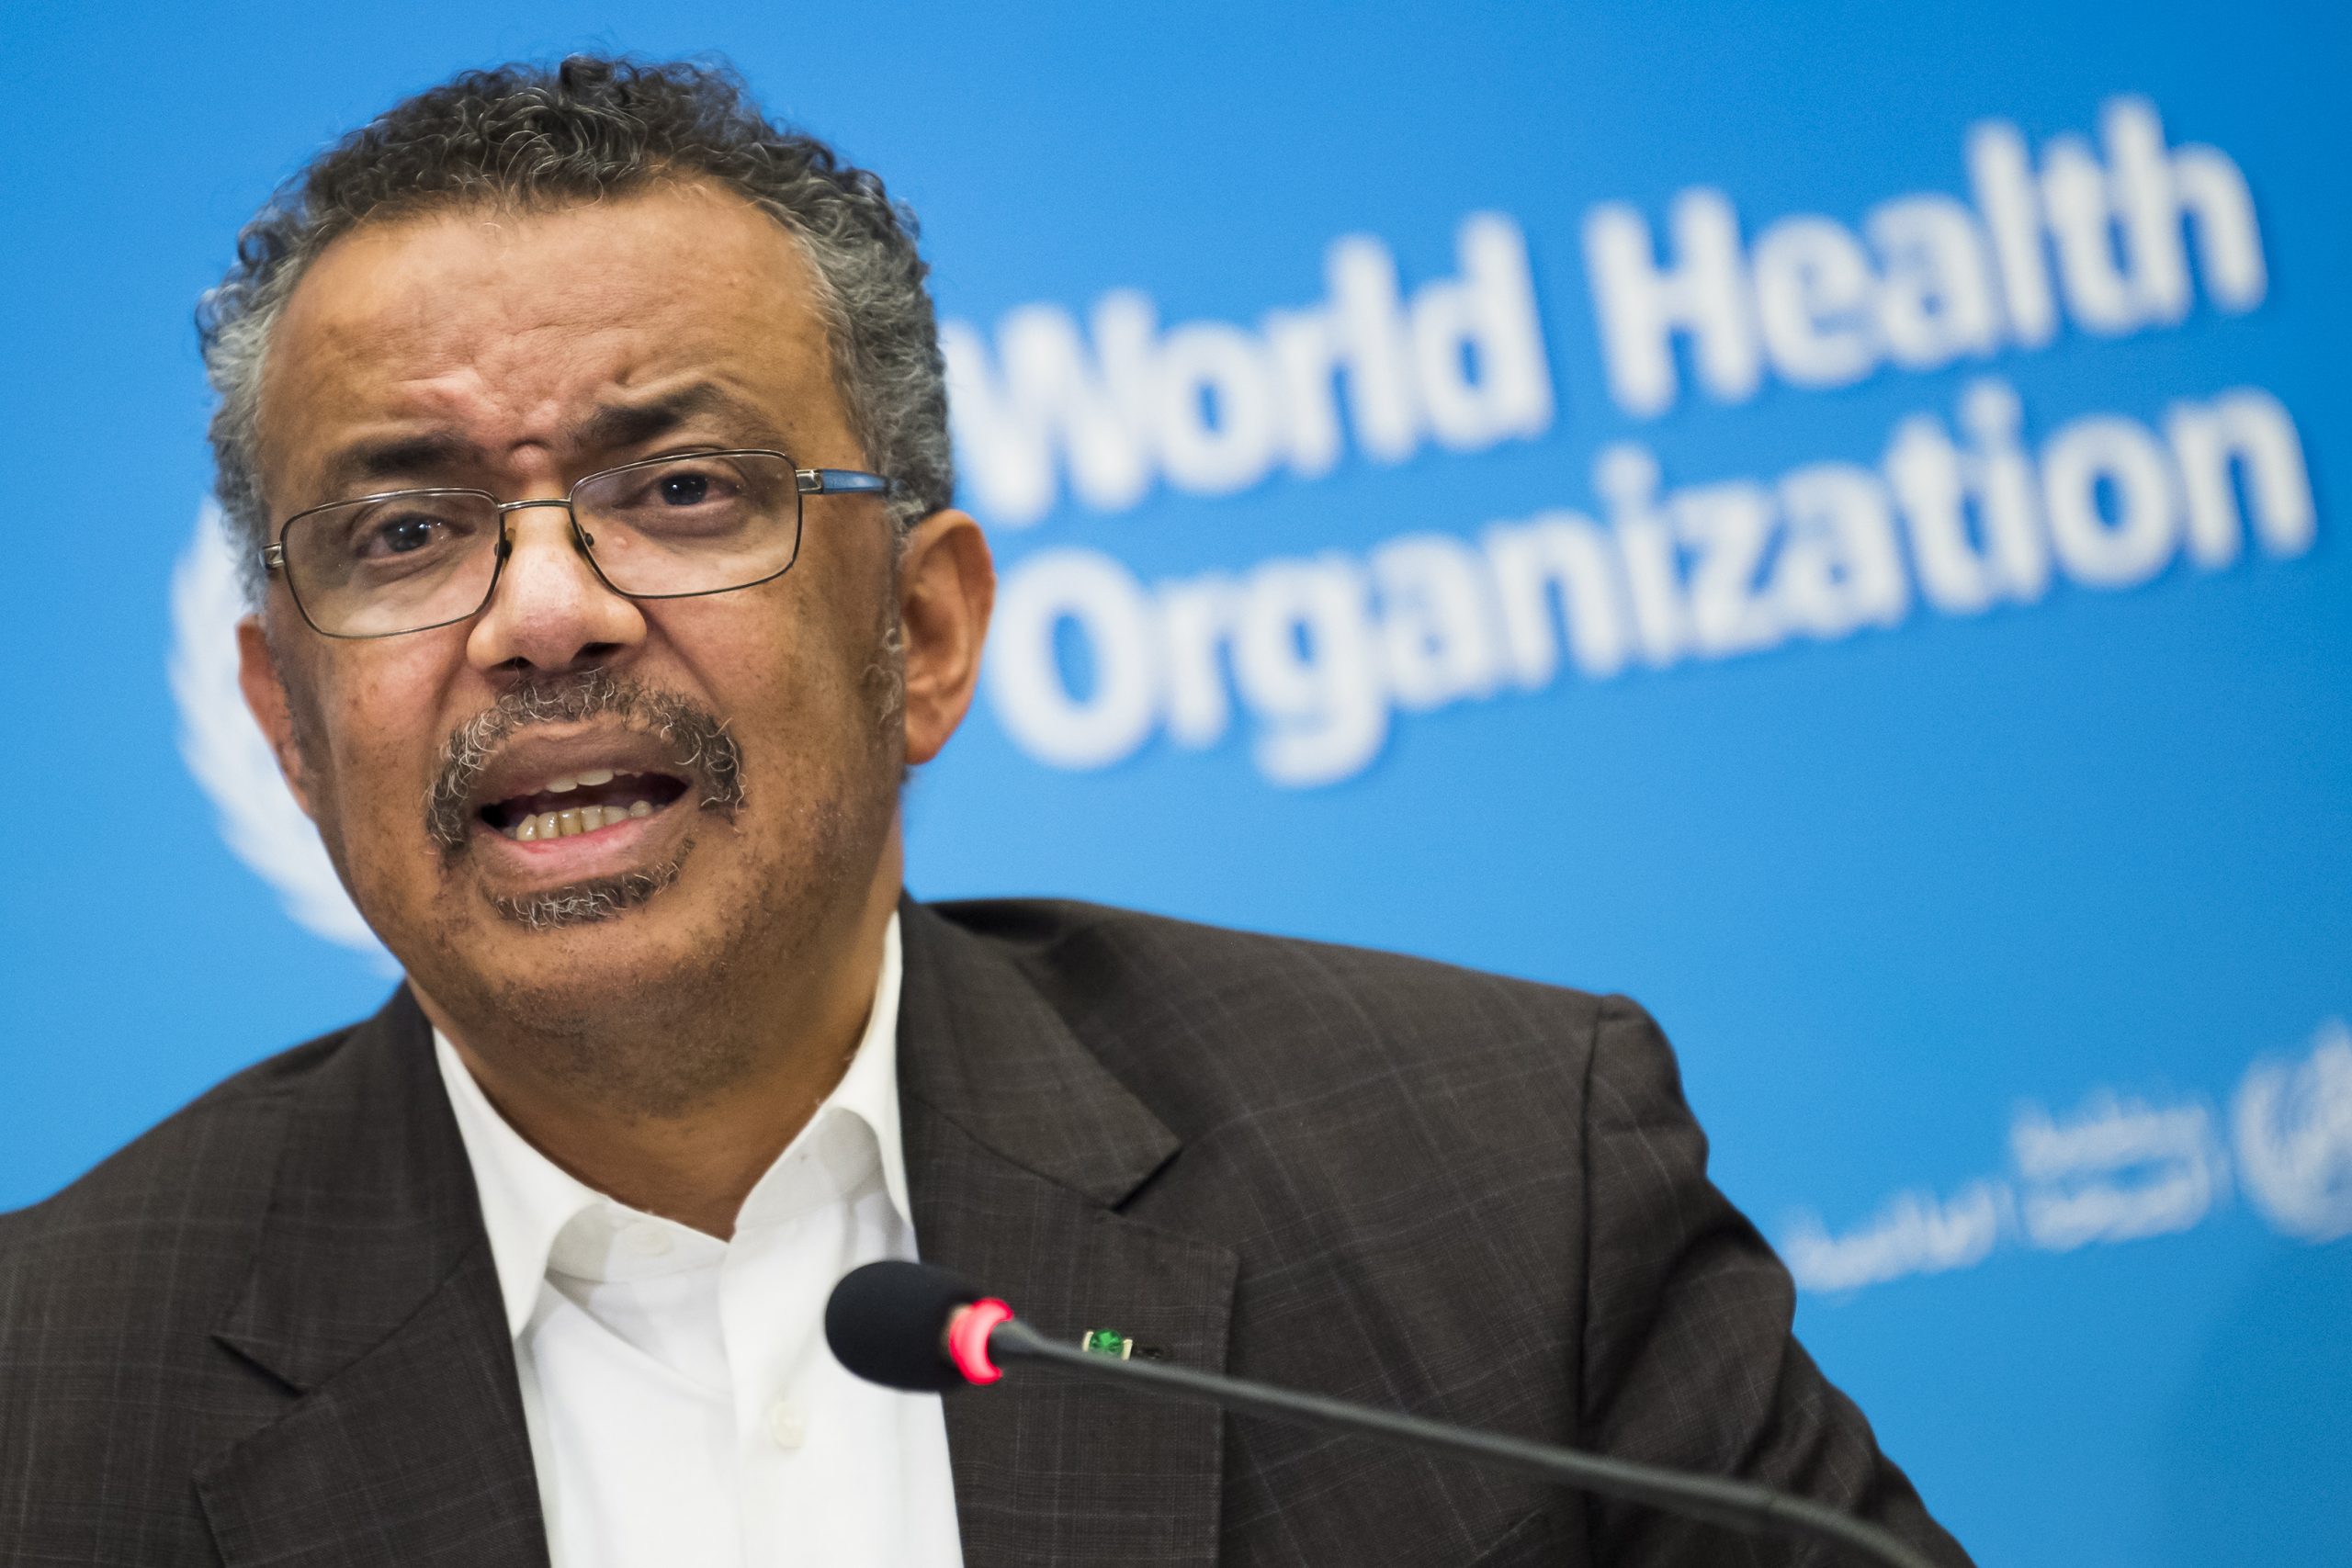 epa08179948 Tedros Adhanom Ghebreyesus, Director General of the World Health Organization (WHO), talks to the media after the WHO's Emergency Committee meeting on the novel coronavirus (2019-nCoV), during a press conference, at the World Health Organization (WHO) headquarters in Geneva, Switzerland, 30  January 2020. The WHO has declared an global public health emergency over the outbreak of the Coronavirus.  EPA/JEAN-CHRISTOPHE BOTT